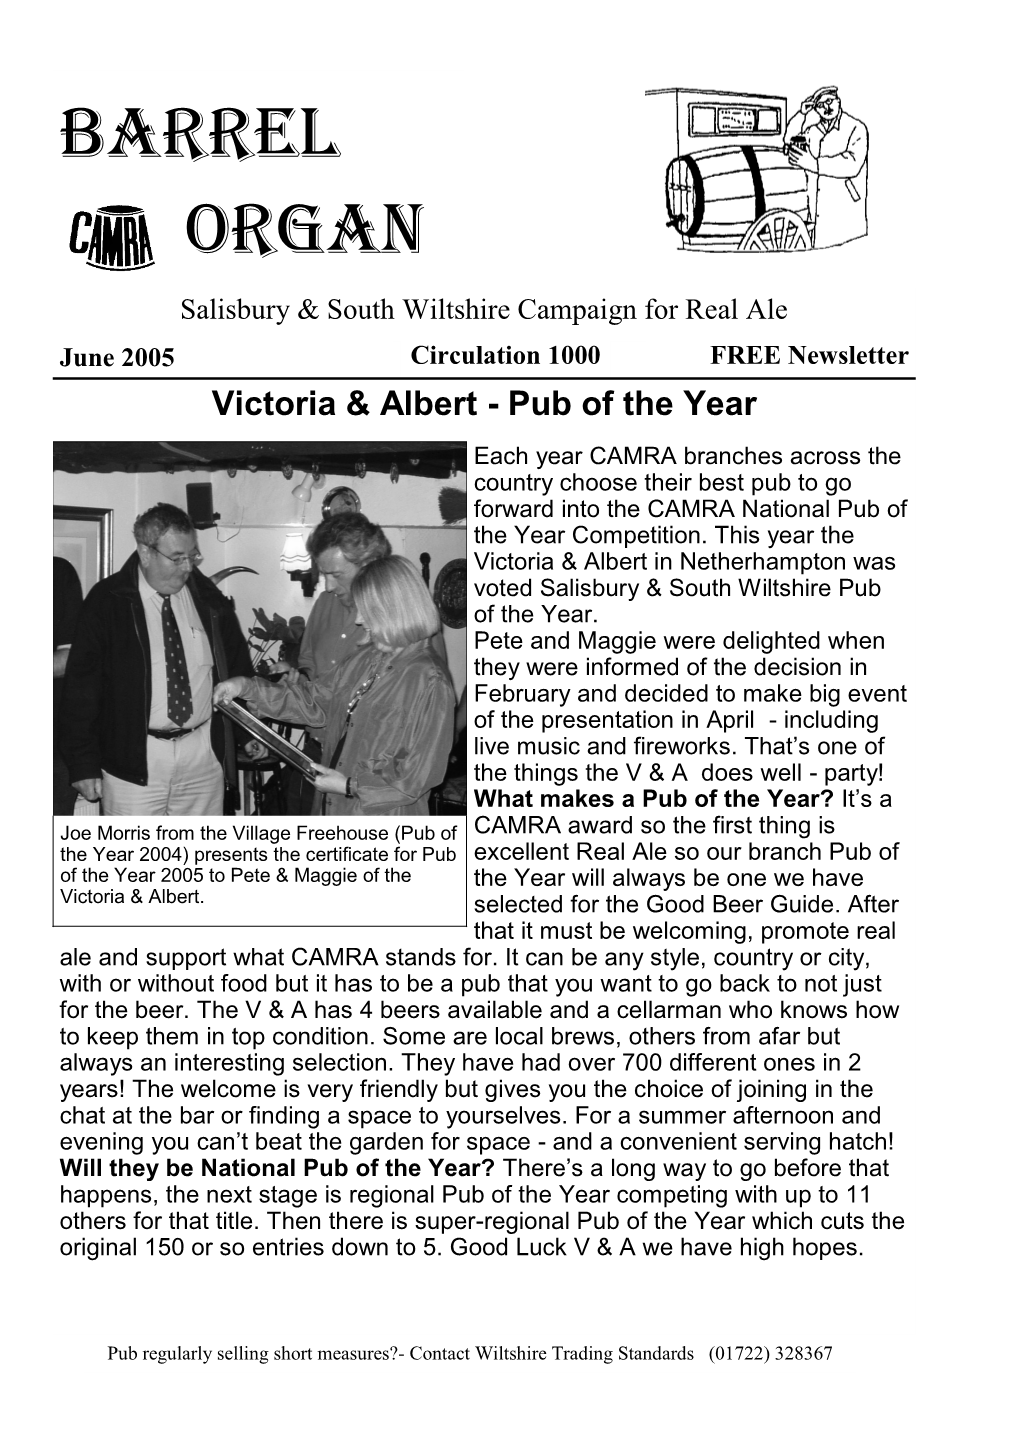 Barrel Organ Salisbury & South Wiltshire Campaign for Real Ale June 2005 Circulation 1000 FREE Newsletter Victoria & Albert - Pub of the Year